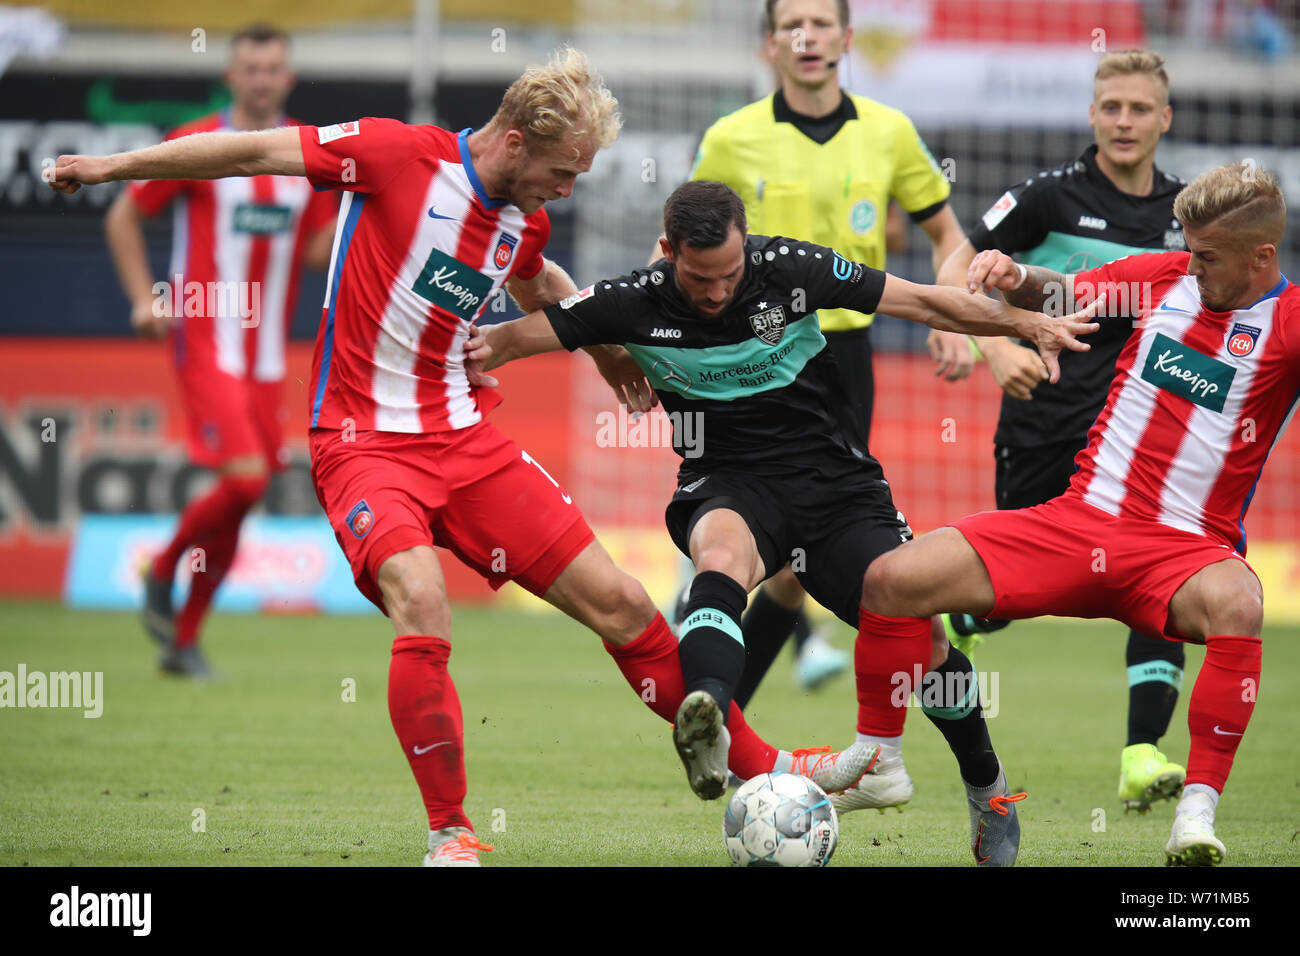 Heidenheim, Germany. 04th Aug, 2019. Soccer: 2nd Bundesliga, 1st FC Heidenheim - VfB Stuttgart, 2nd matchday, in the Voith Arena. Sebastian Griesbeck (l) and Niklas Dorsch (r) from Heidenheim fight with Gonzalo Castro from Stuttgart for the ball. Credit: Daniel Karmann/dpa - IMPORTANT NOTE: In accordance with the requirements of the DFL Deutsche Fußball Liga or the DFB Deutscher Fußball-Bund, it is prohibited to use or have used photographs taken in the stadium and/or the match in the form of sequence images and/or video-like photo sequences./dpa/Alamy Live News Stock Photo